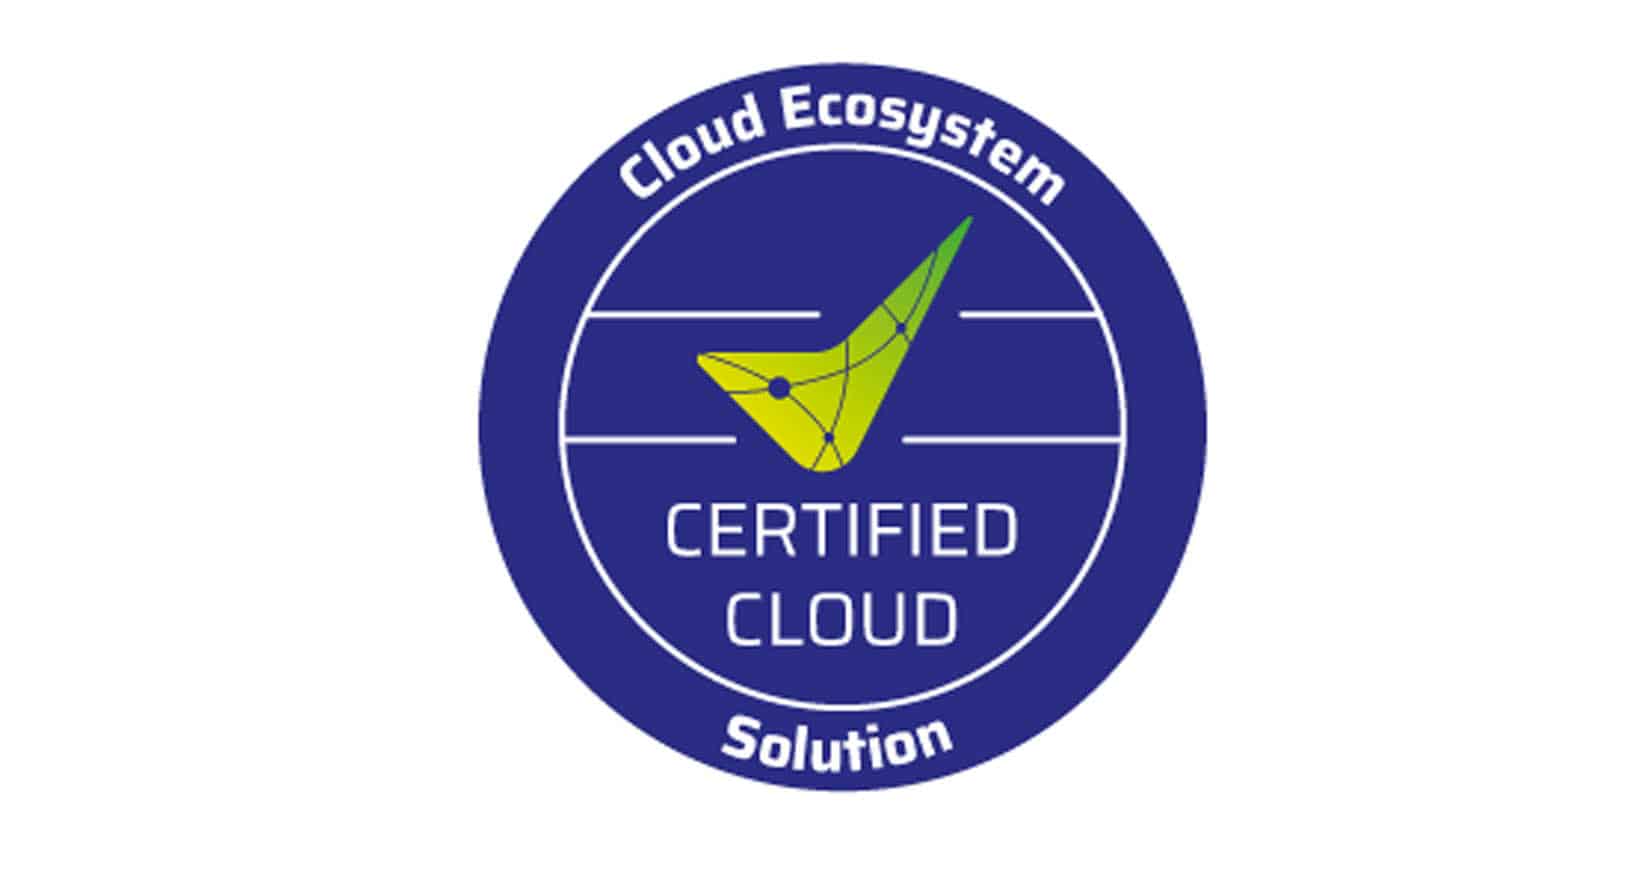 ZEP - time recording for projects again successfully certified as Certified Cloud at the Cloud Ecosystem